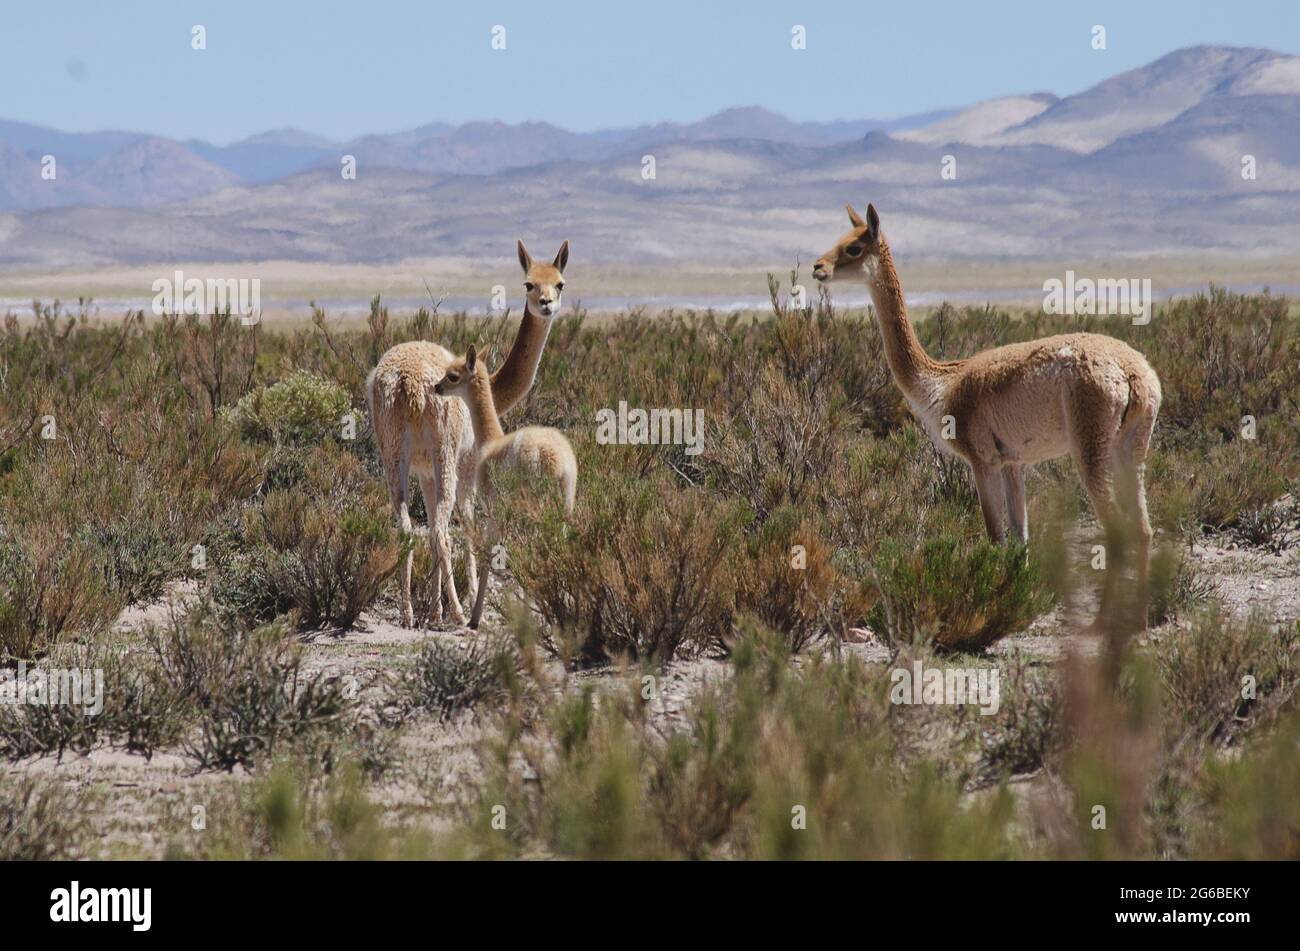 Three vicunas standing in rural landscape, Jujuy, Argentina Stock Photo